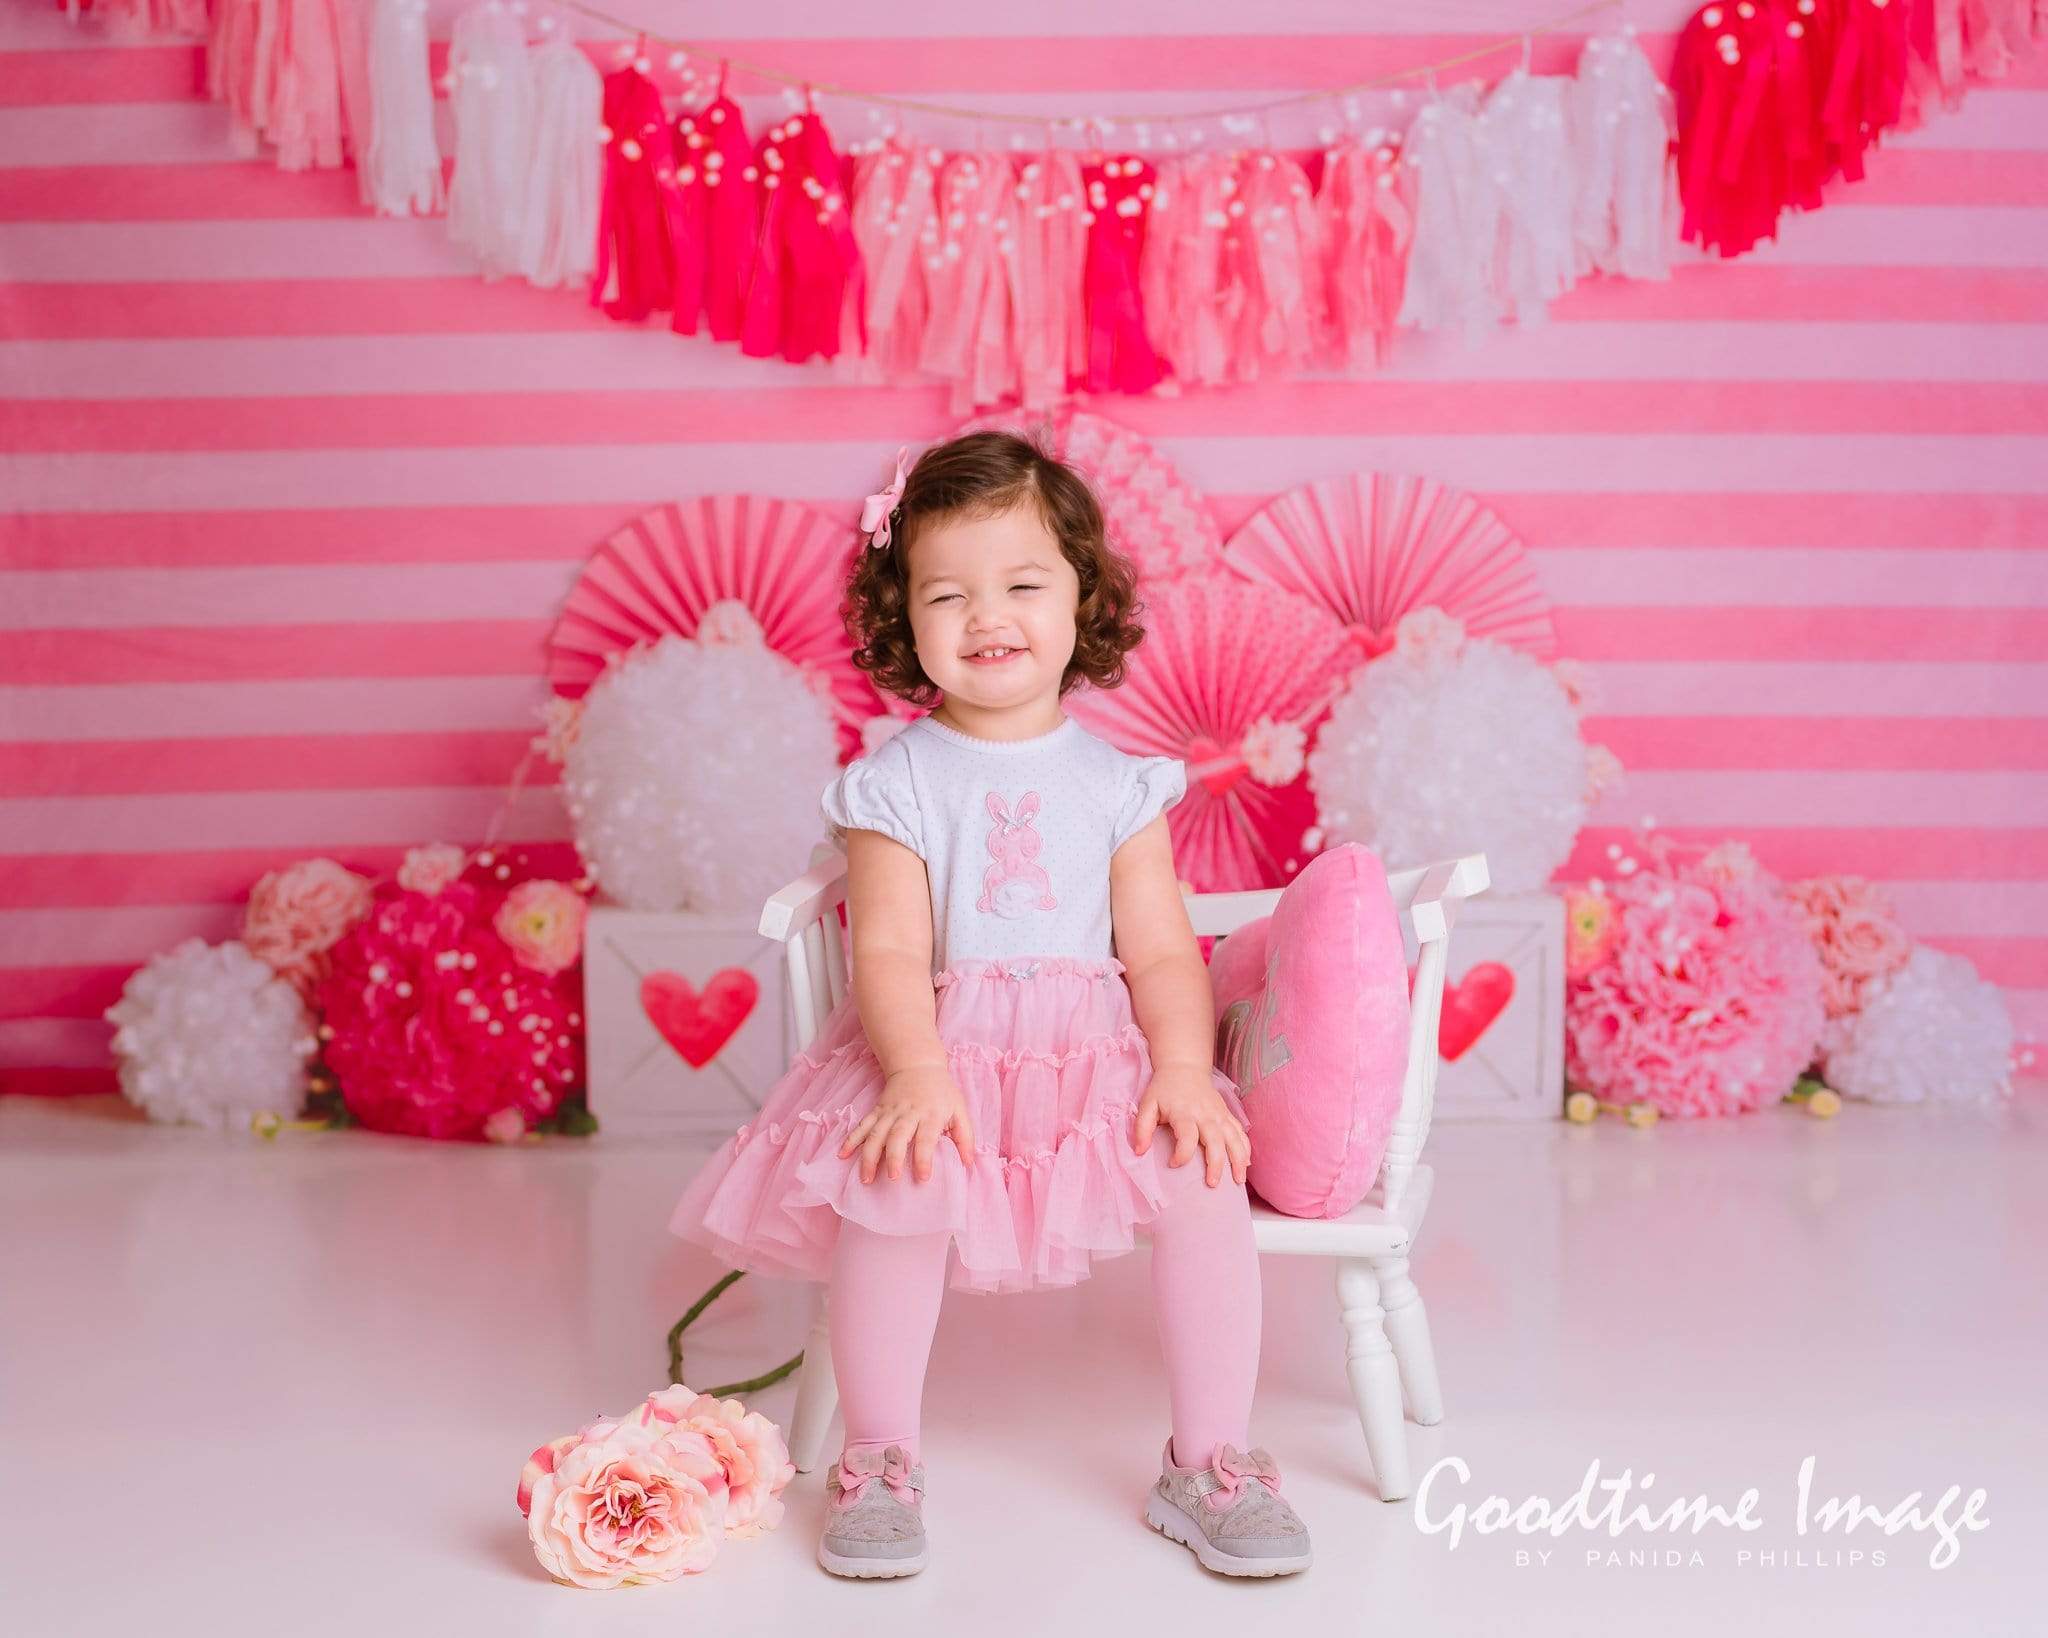 Kate Valentine's Day with Hearts and Stripes Backdrop Designed By Mandy Ringe Photography